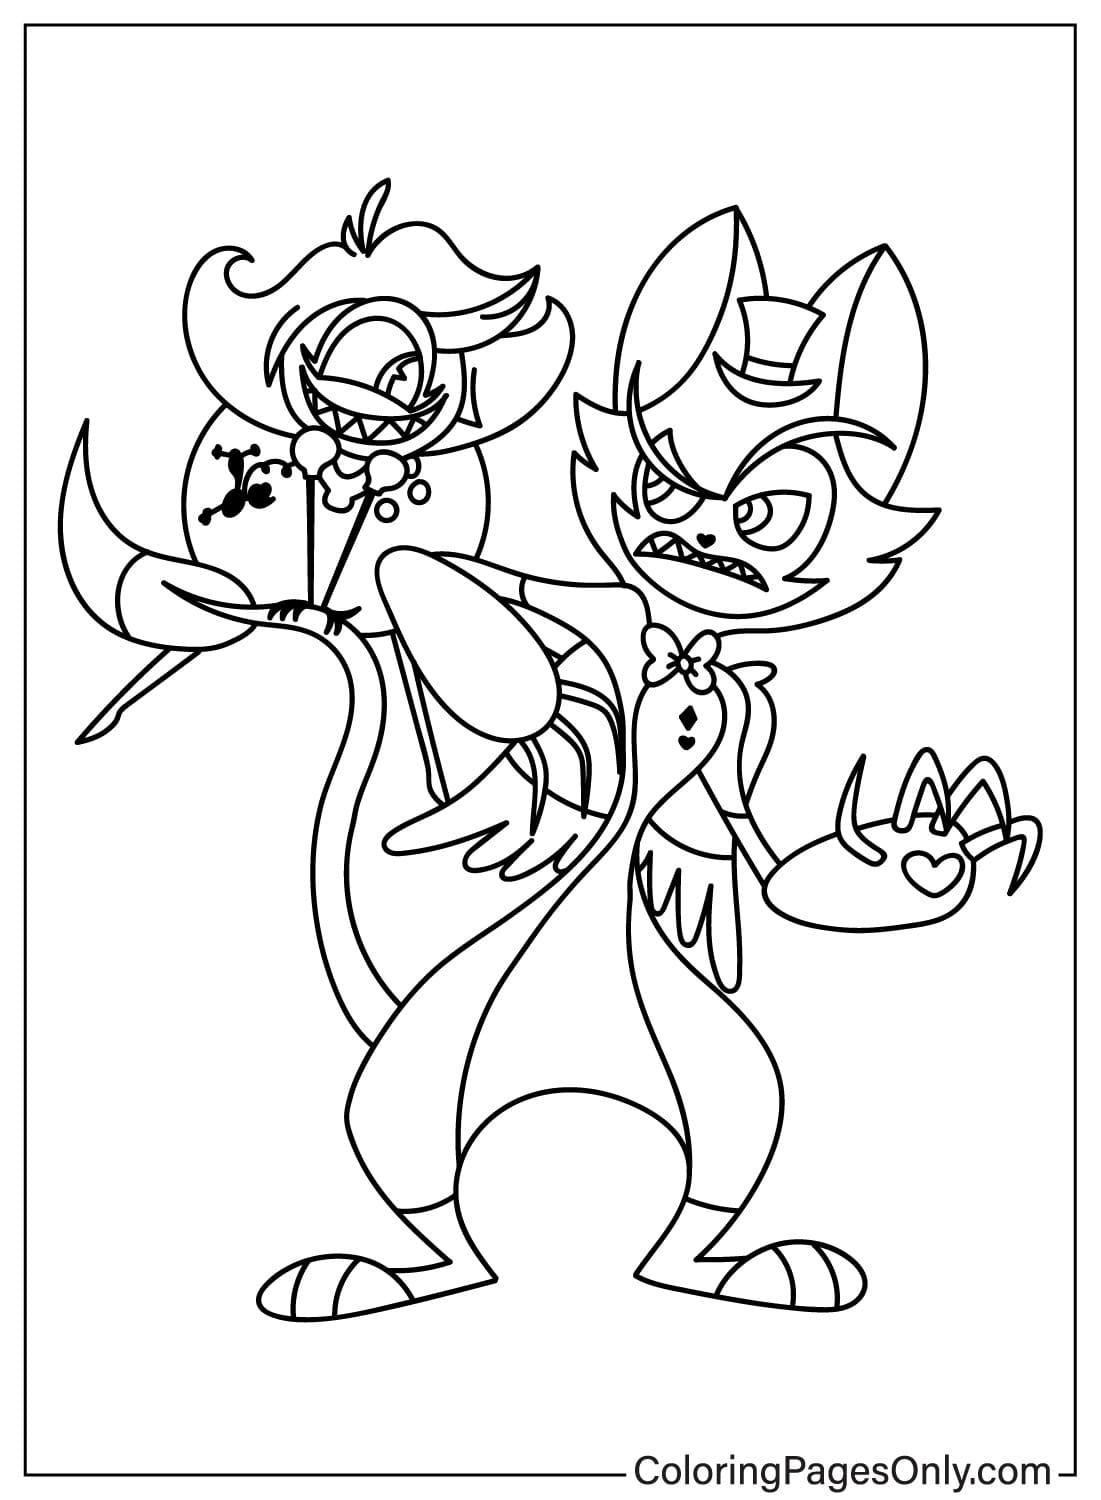 Niffty, Husk Coloring Page from Husk